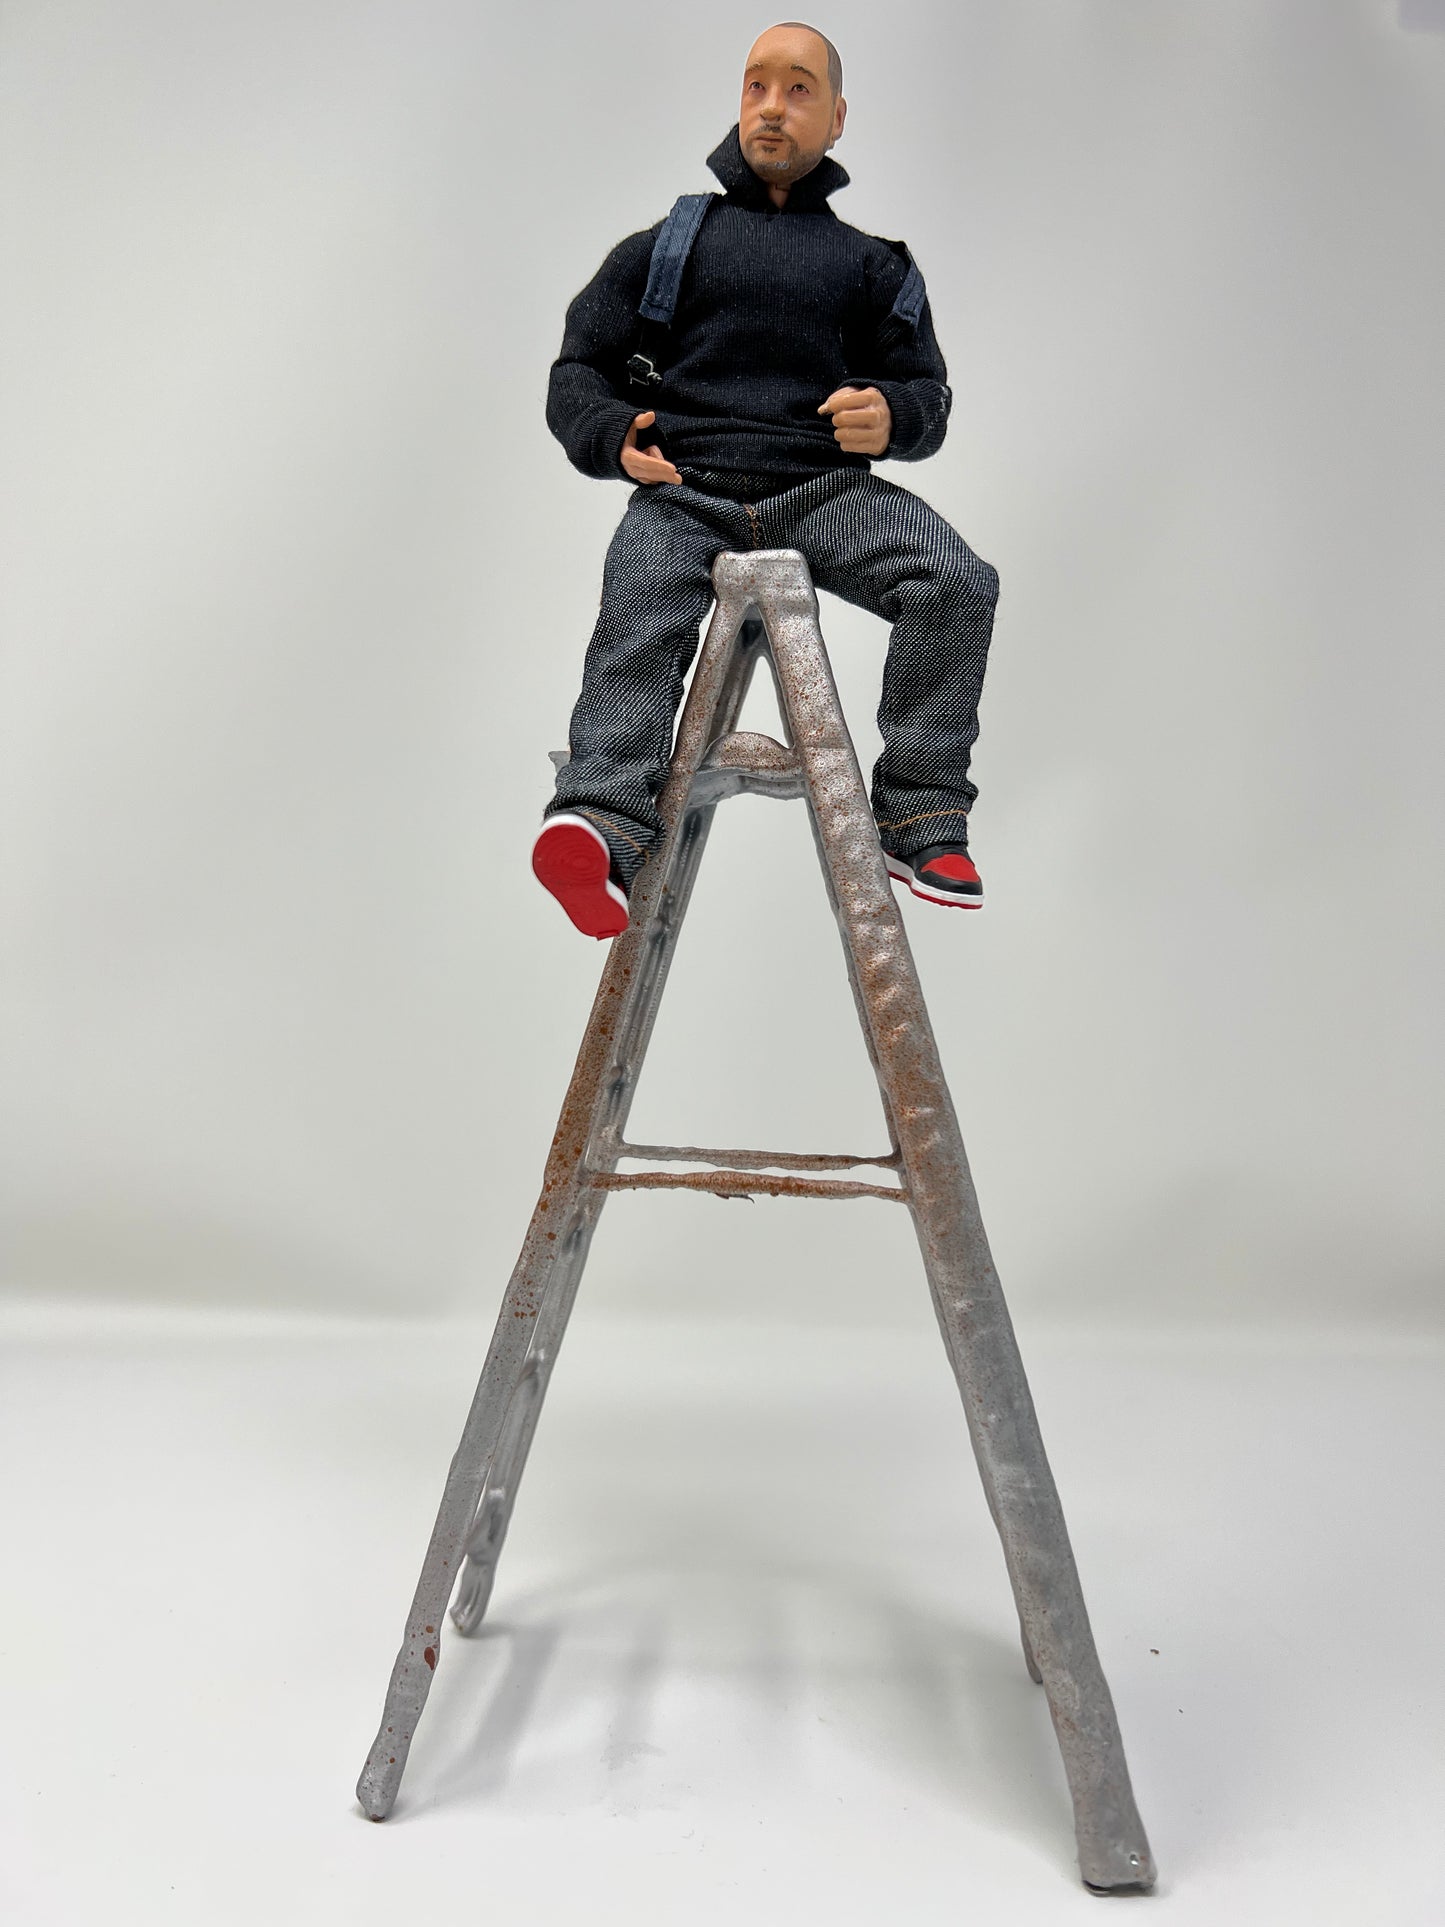 1/12th scale ladder